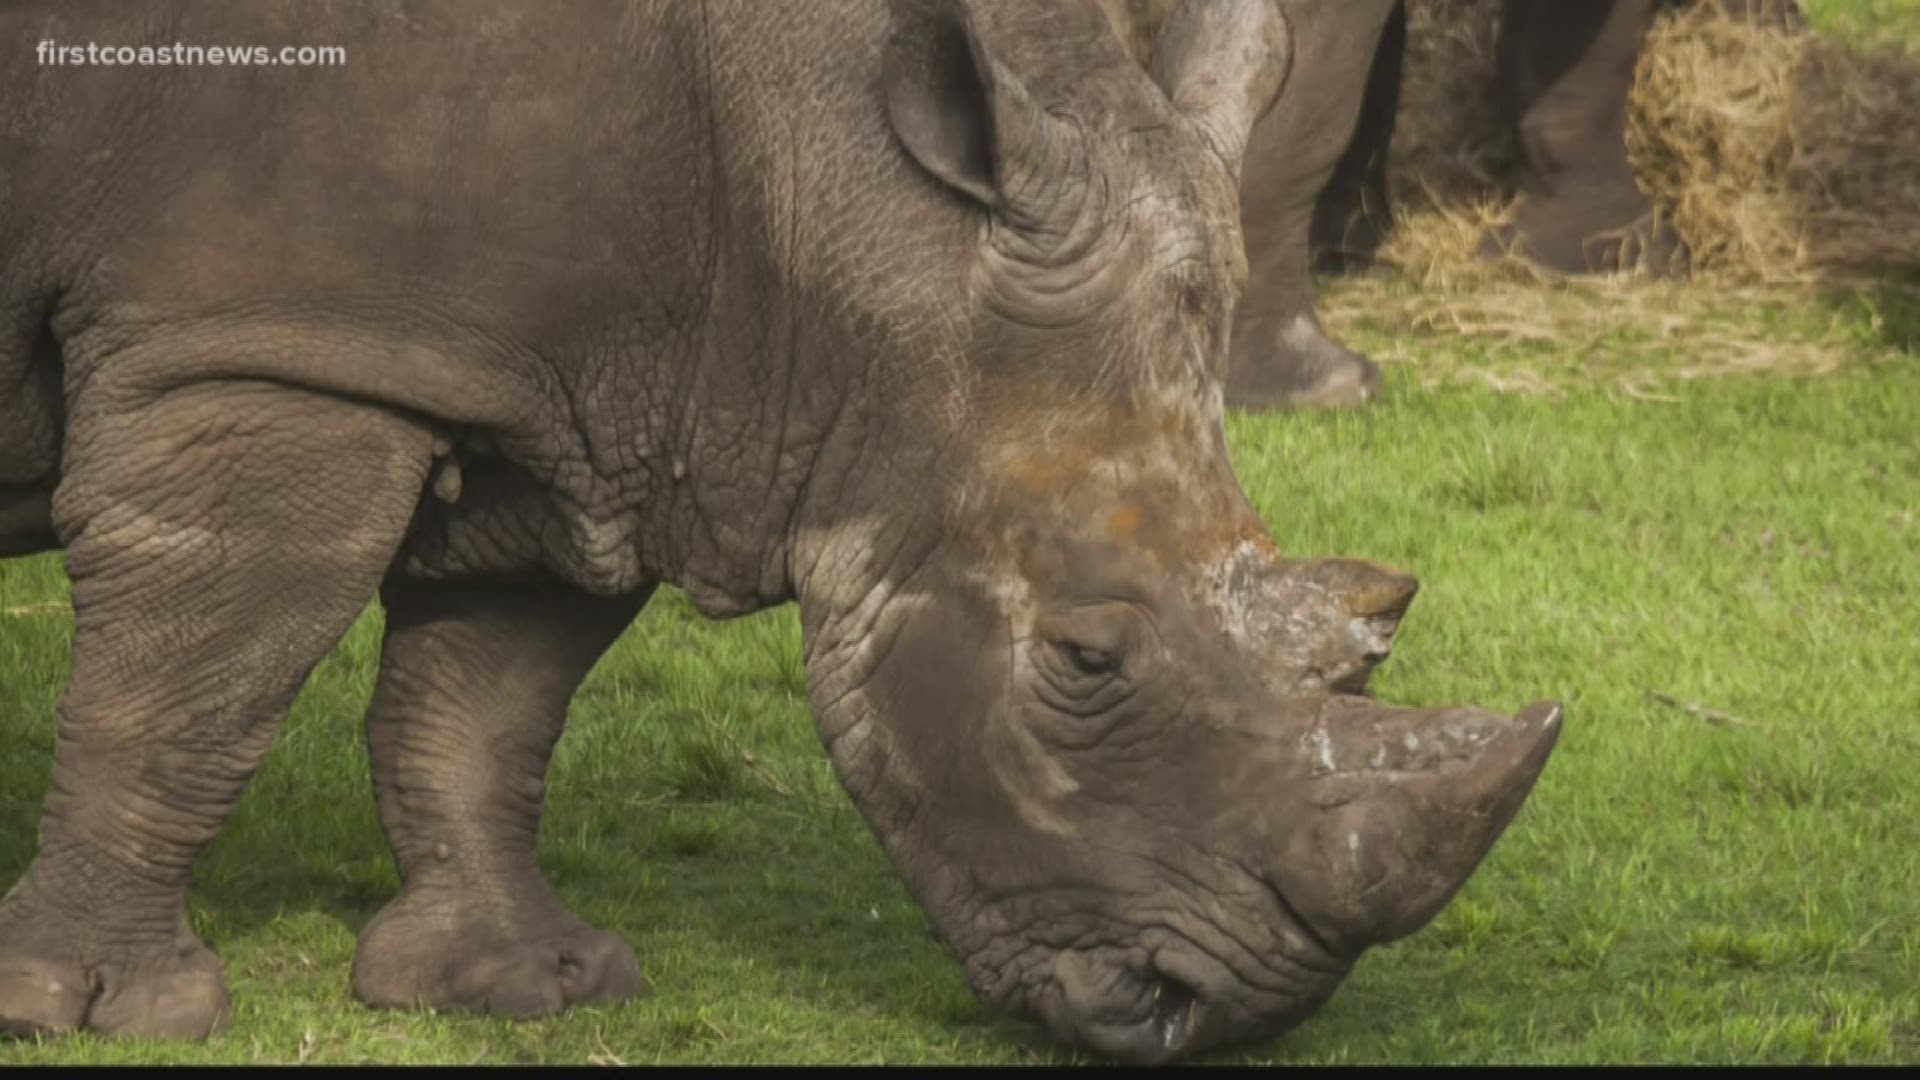 On Tuesday a female zookeeper was struck by the horn of a Southern white rhino during a routine training session. A Jacksonville Zoo and Gardens spokesperson said Wednesday that "the rhino is doing fine but is very naughty."